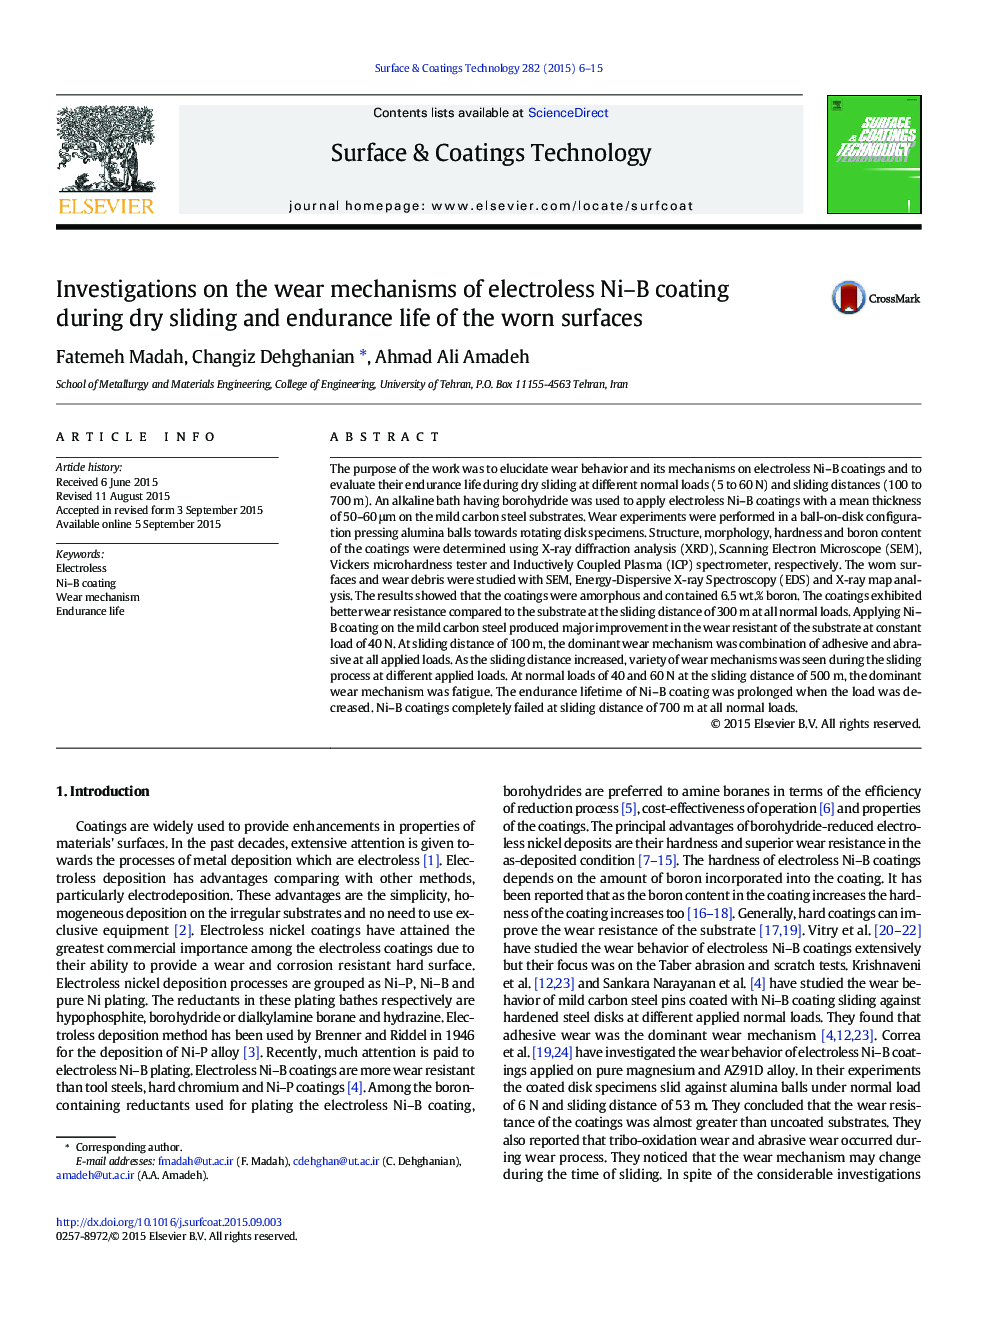 Investigations on the wear mechanisms of electroless Ni-B coating during dry sliding and endurance life of the worn surfaces